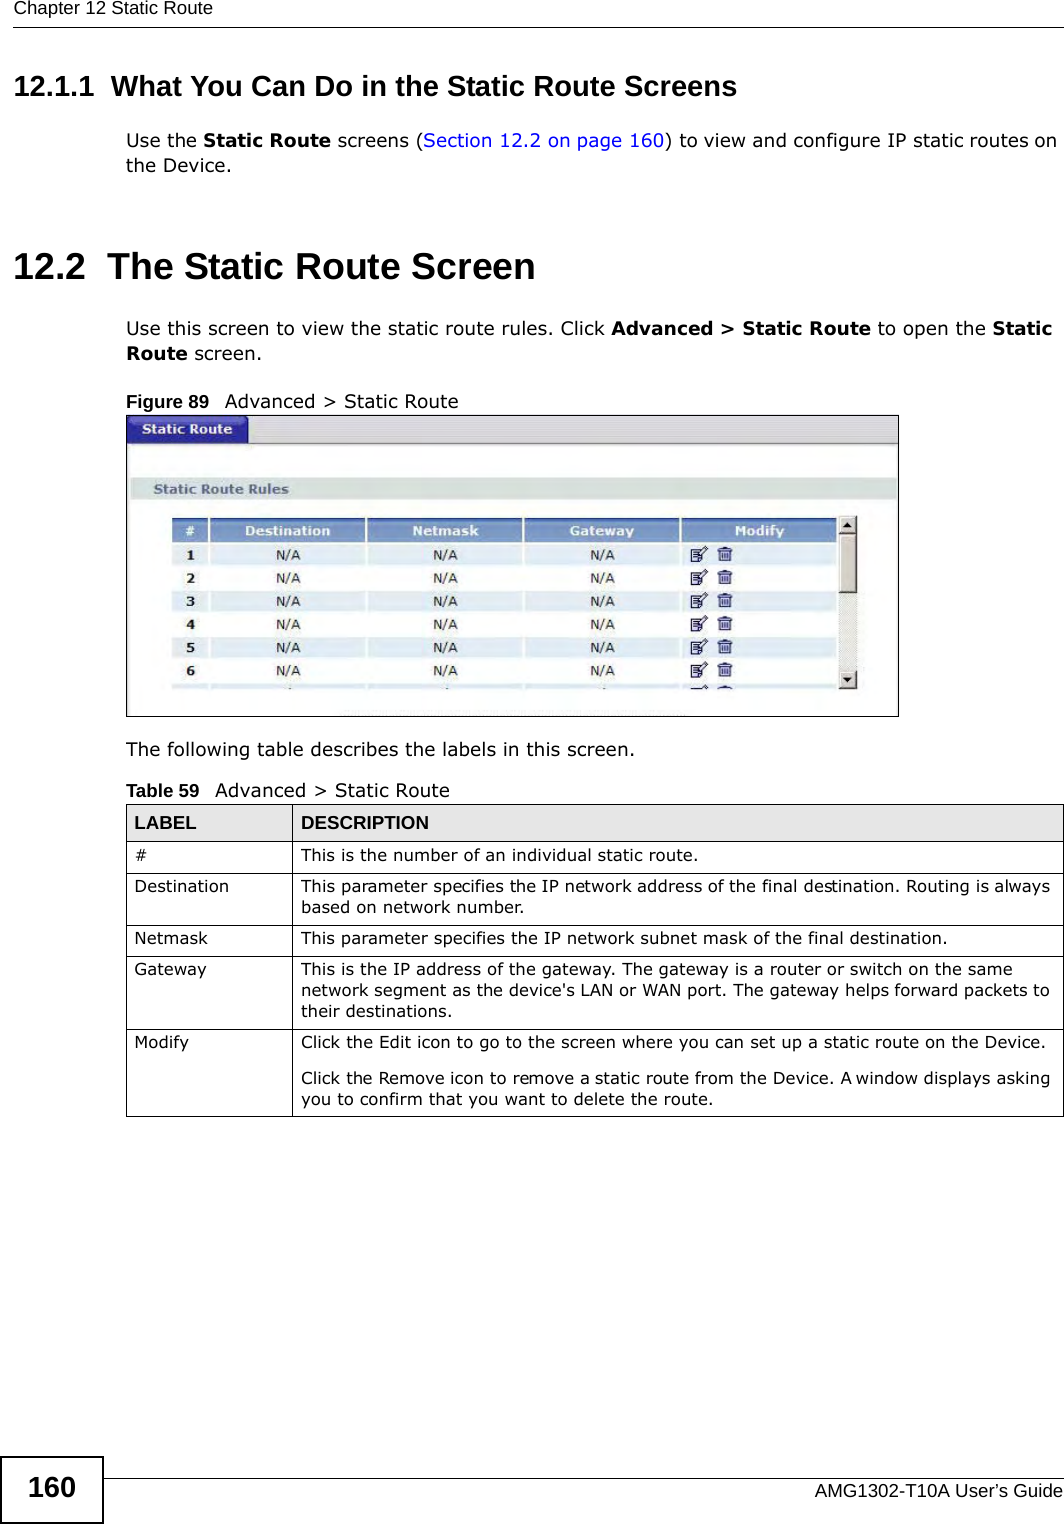 Chapter 12 Static RouteAMG1302-T10A User’s Guide16012.1.1  What You Can Do in the Static Route ScreensUse the Static Route screens (Section 12.2 on page 160) to view and configure IP static routes on the Device.12.2  The Static Route ScreenUse this screen to view the static route rules. Click Advanced &gt; Static Route to open the Static Route screen.Figure 89   Advanced &gt; Static RouteThe following table describes the labels in this screen. Table 59   Advanced &gt; Static RouteLABEL DESCRIPTION#This is the number of an individual static route.Destination This parameter specifies the IP network address of the final destination. Routing is always based on network number. Netmask This parameter specifies the IP network subnet mask of the final destination.Gateway This is the IP address of the gateway. The gateway is a router or switch on the same network segment as the device&apos;s LAN or WAN port. The gateway helps forward packets to their destinations.Modify Click the Edit icon to go to the screen where you can set up a static route on the Device.Click the Remove icon to remove a static route from the Device. A window displays asking you to confirm that you want to delete the route. 